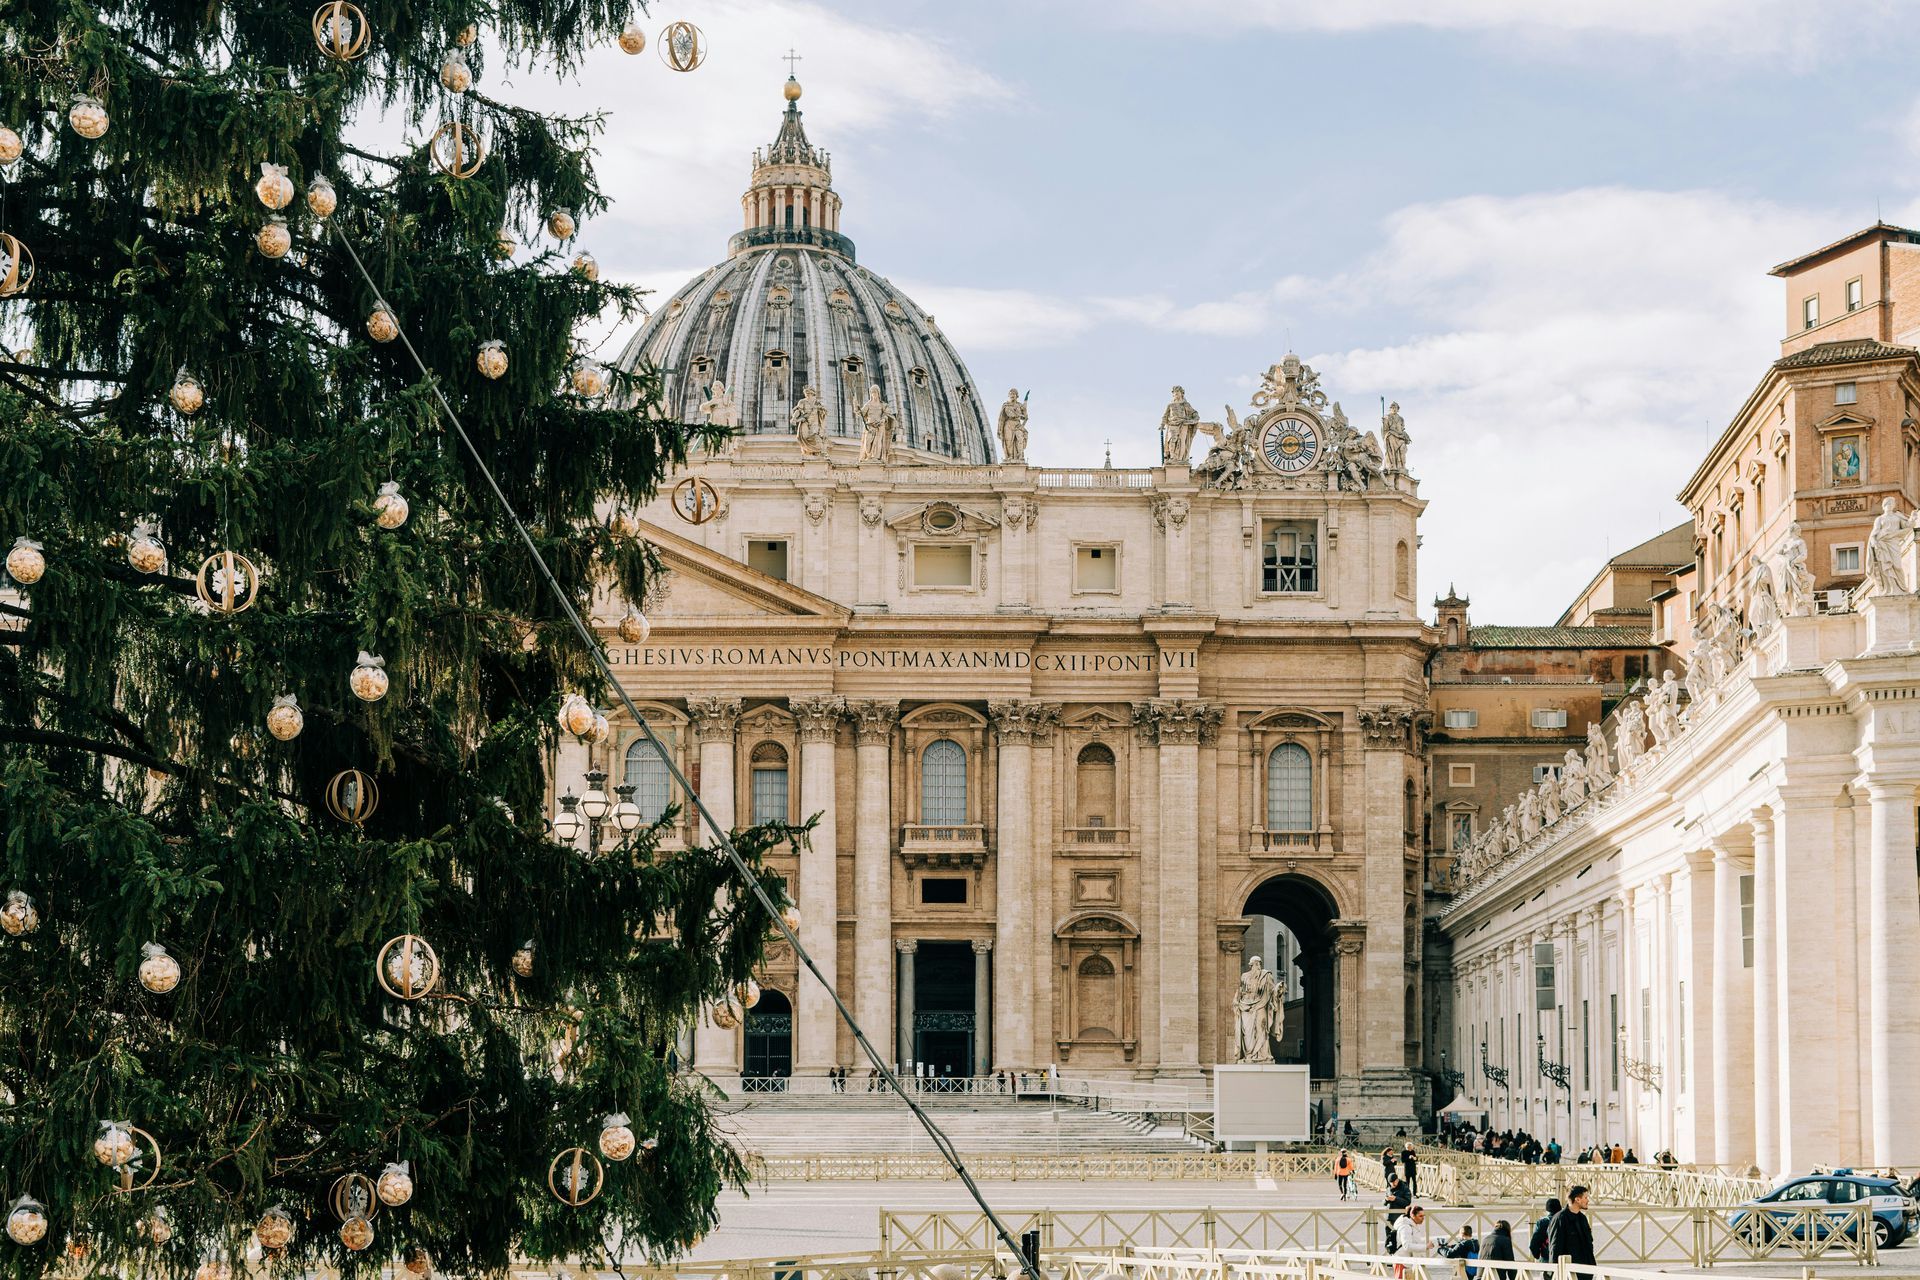 What Day to Visit the Vatican?